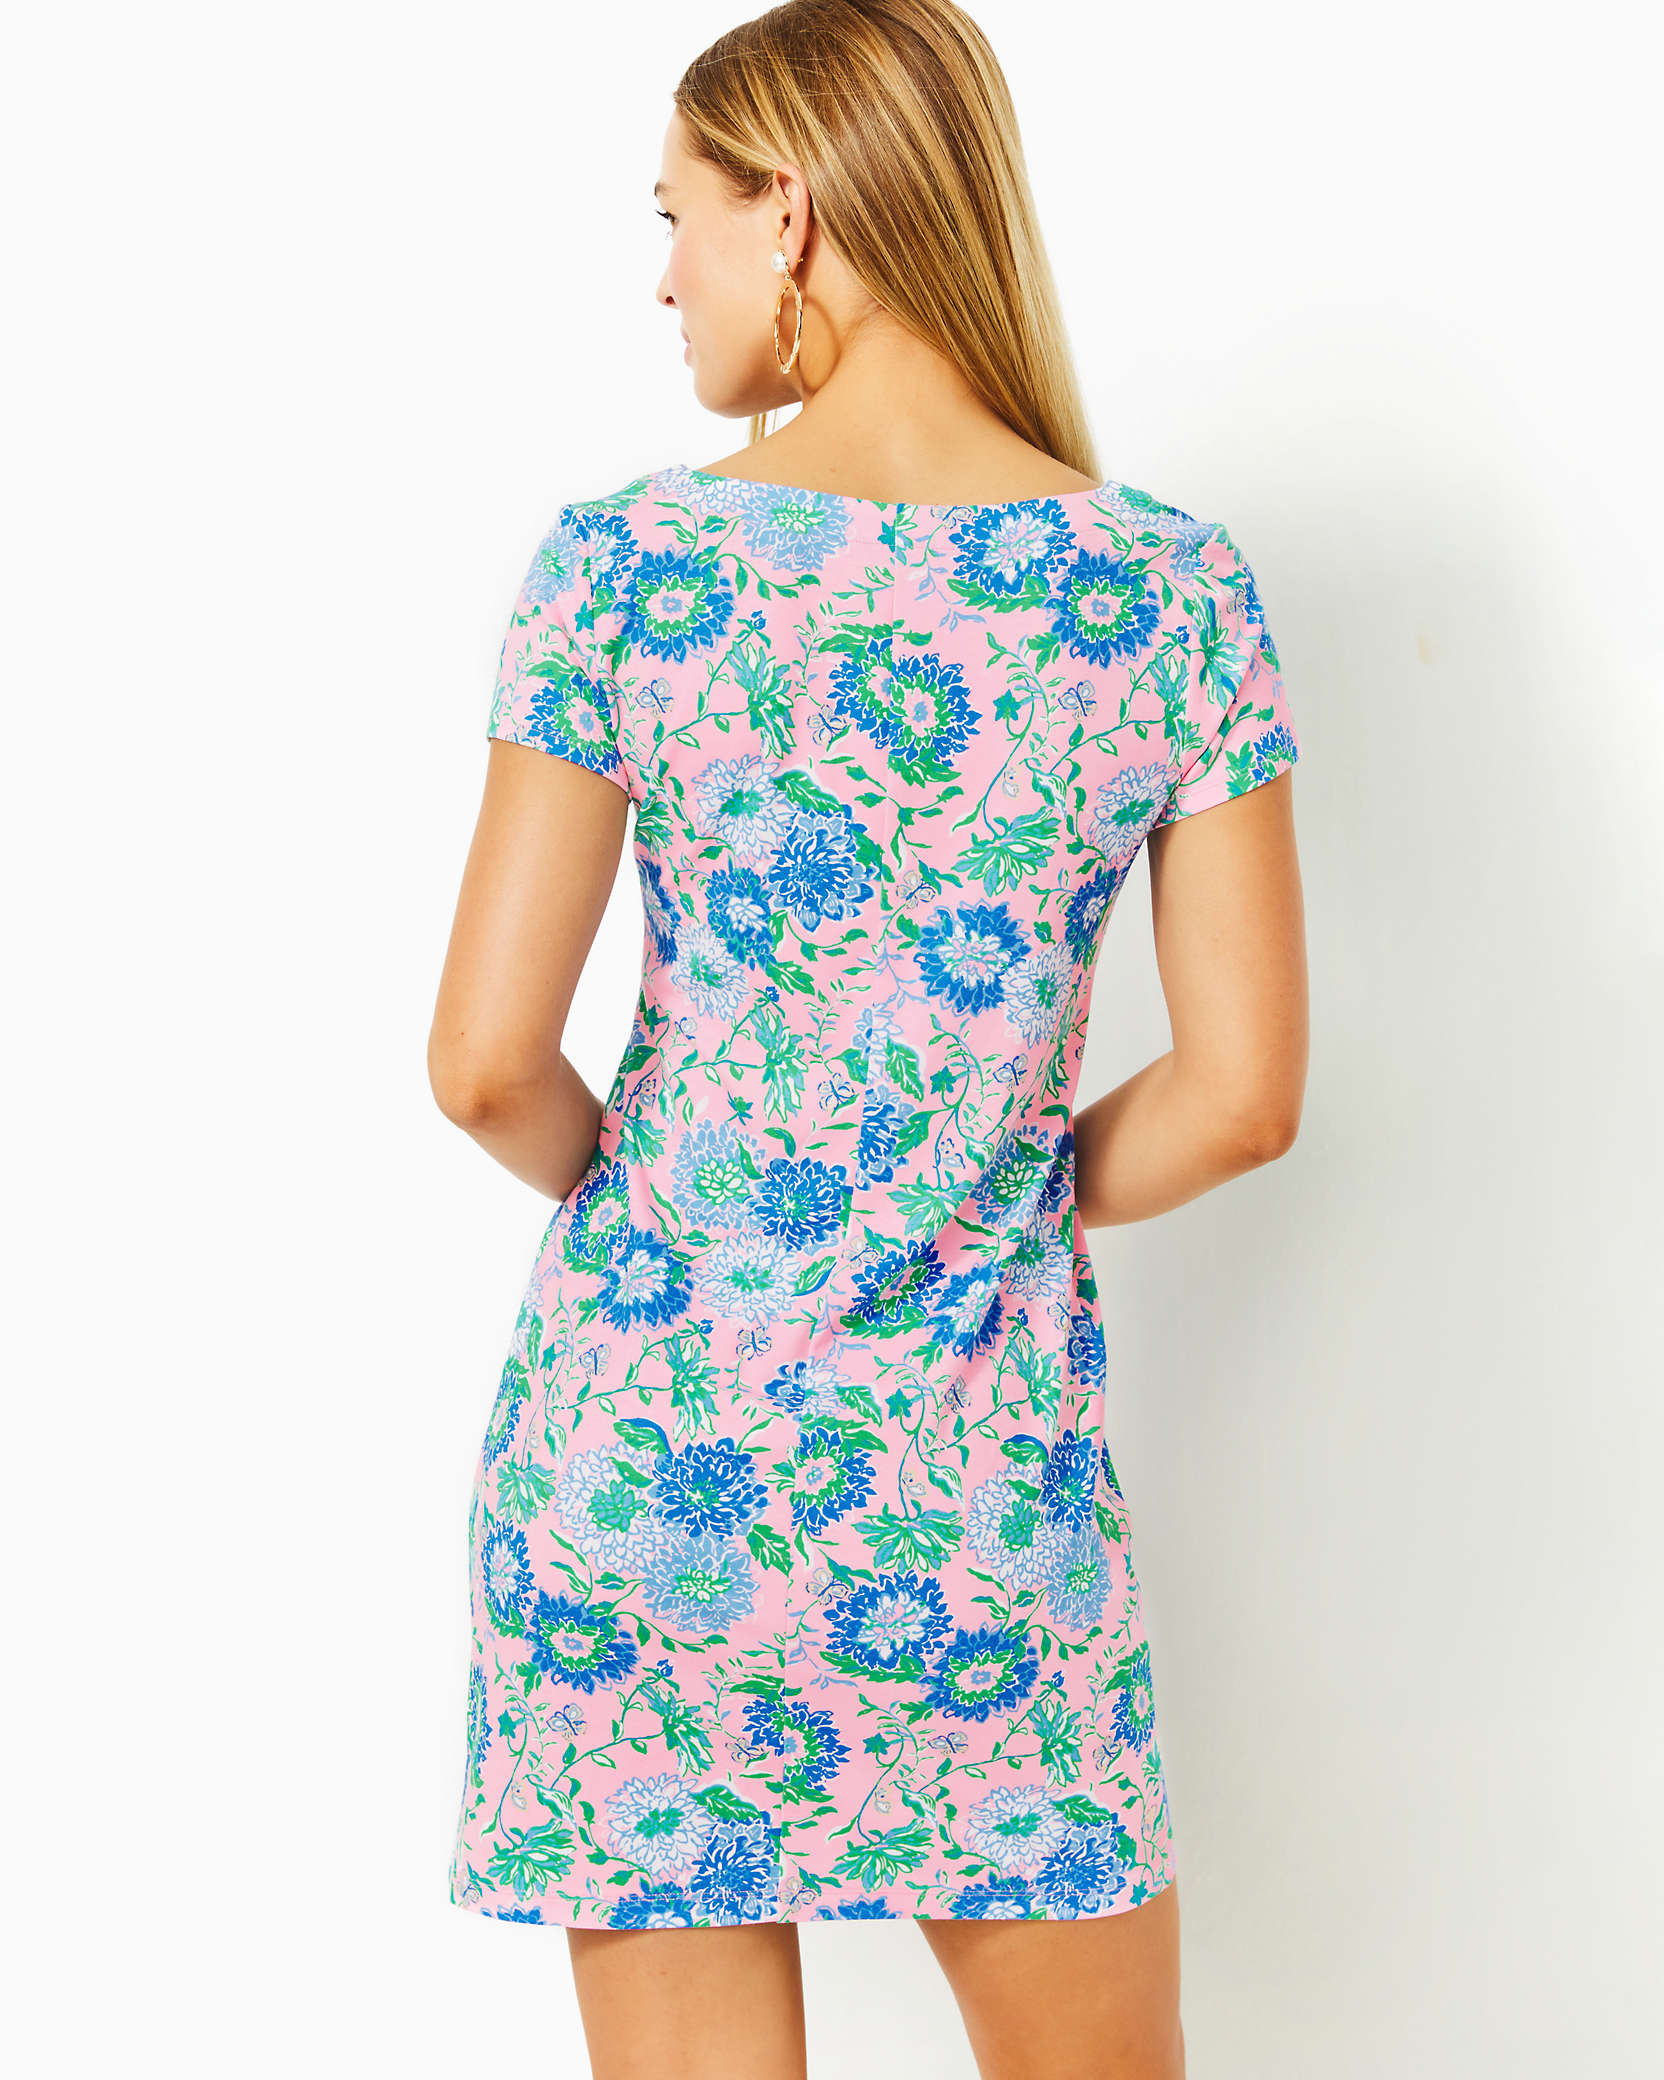 Shop Lilly Pulitzer Upf 50+ Sophiletta Dress In Conch Shell Pink Rumor Has It